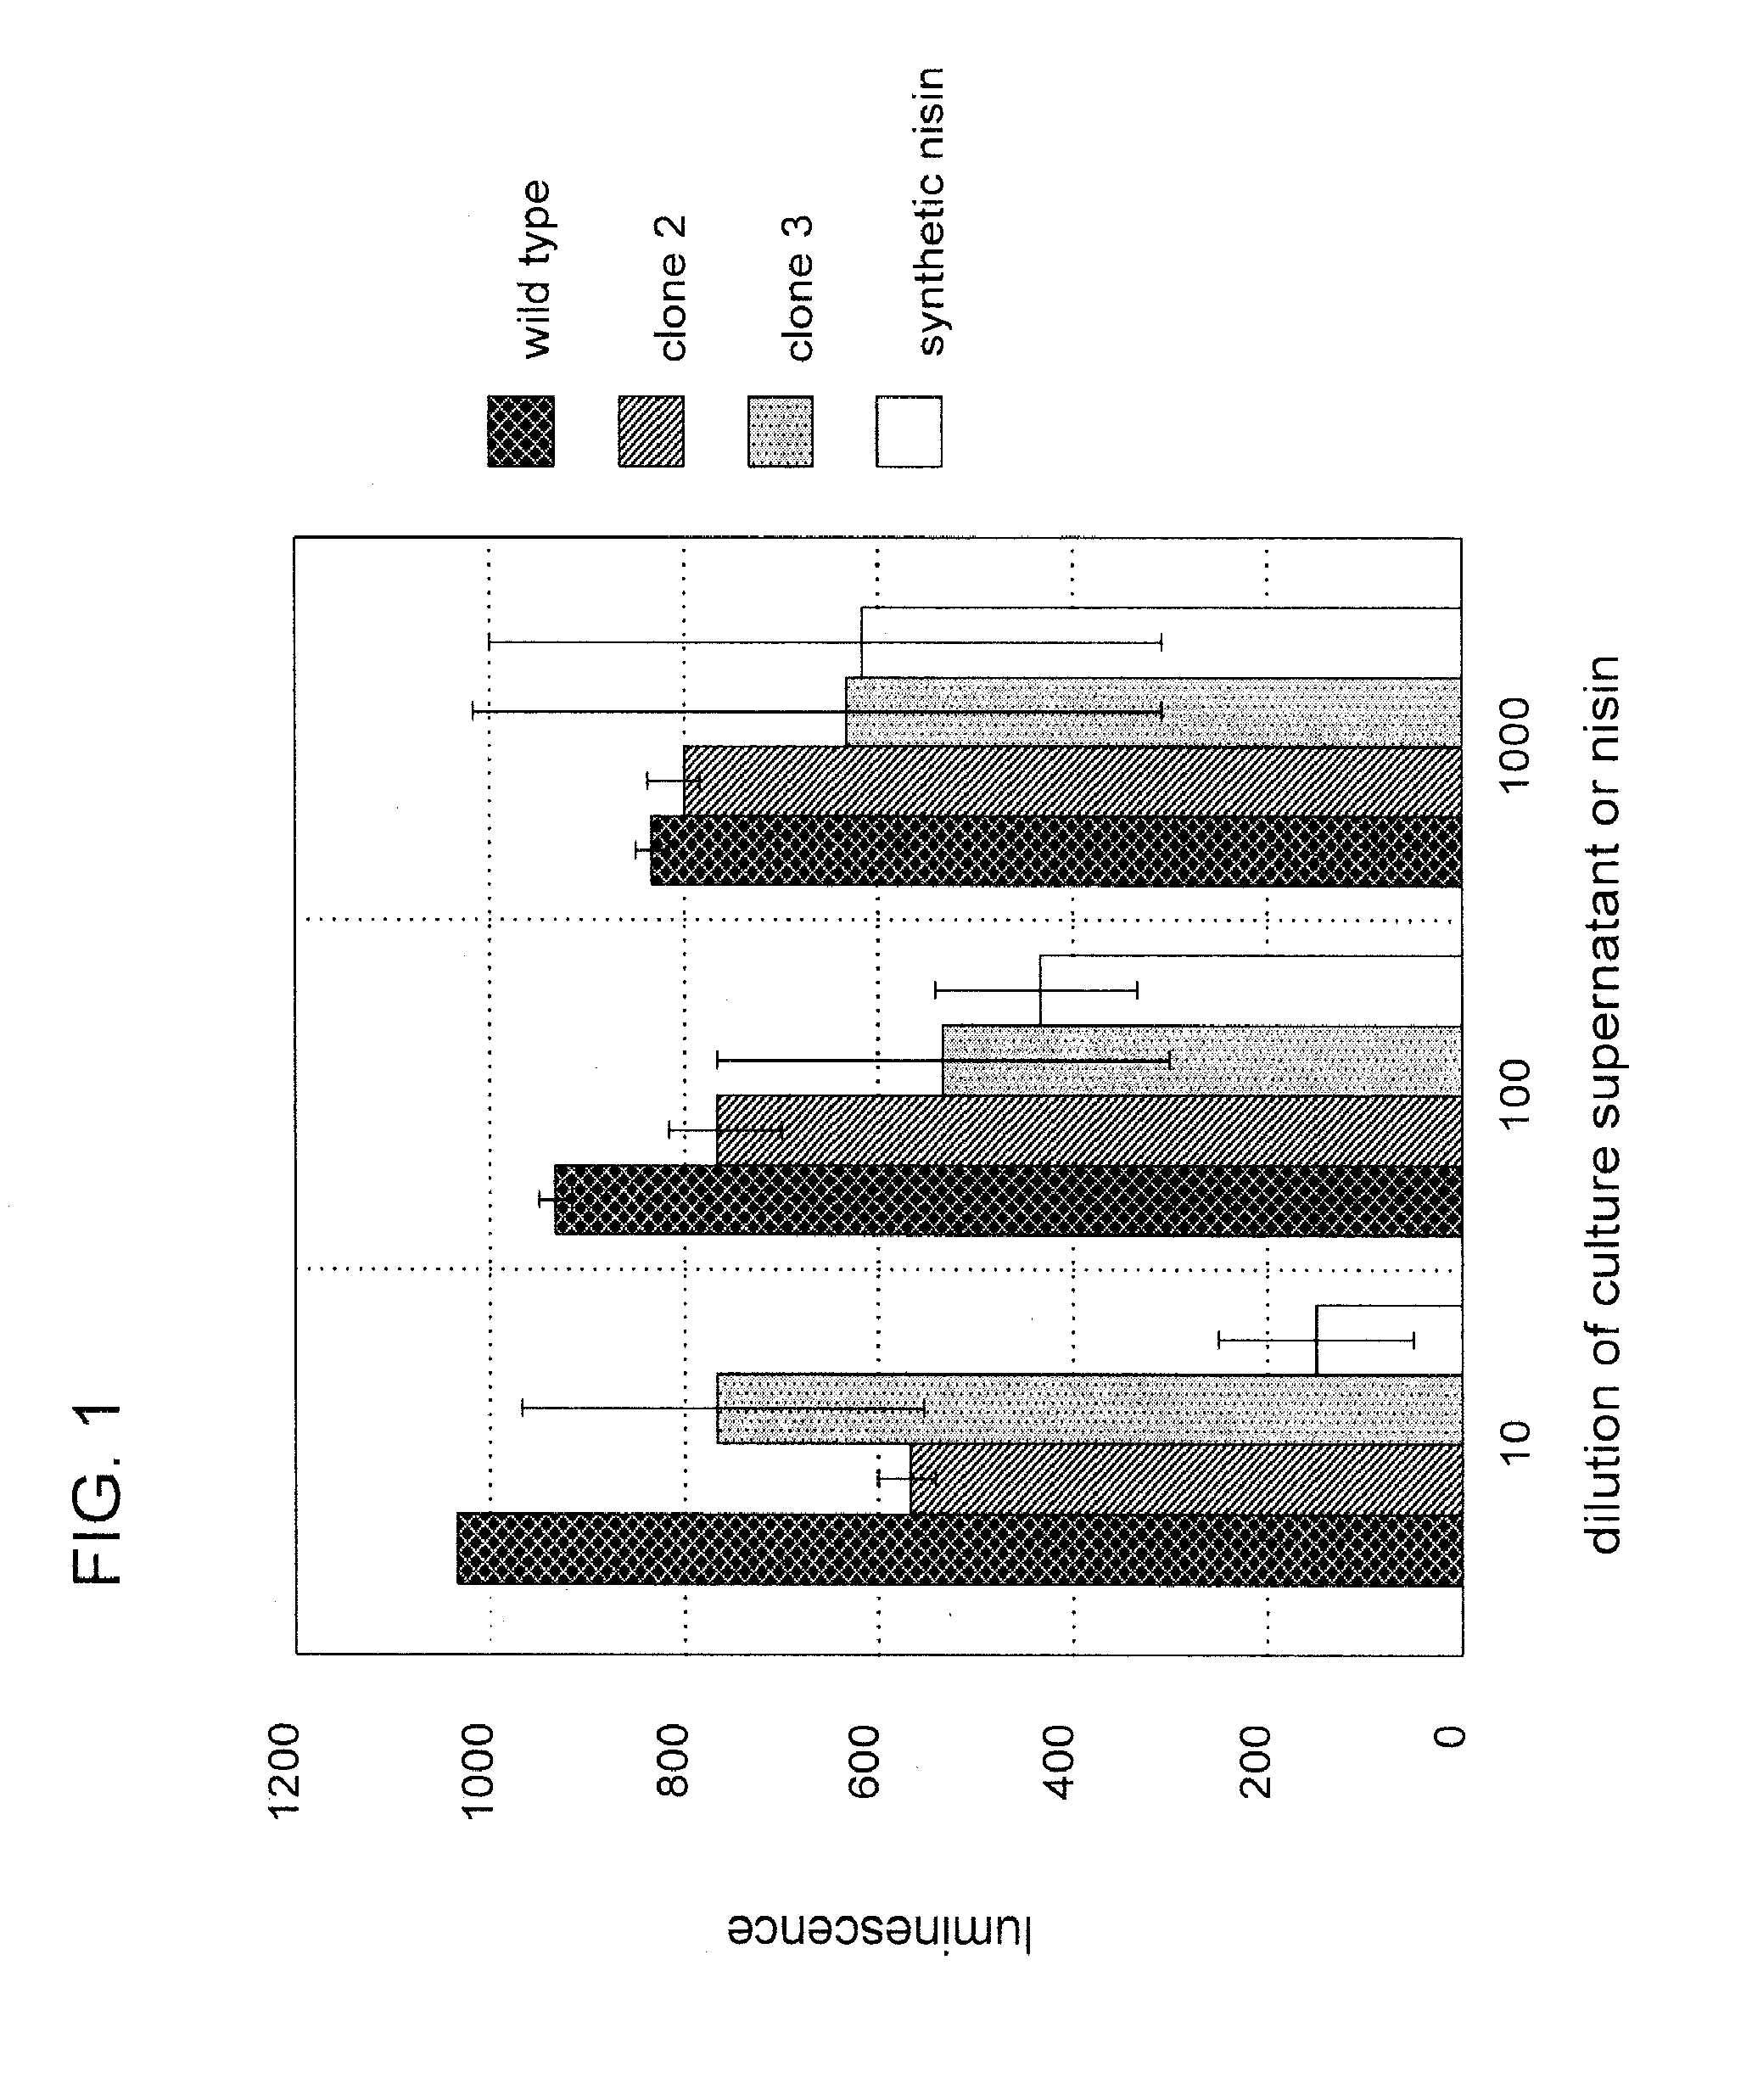 Bacteriophage derived methods to control lactic acid bacterial growth